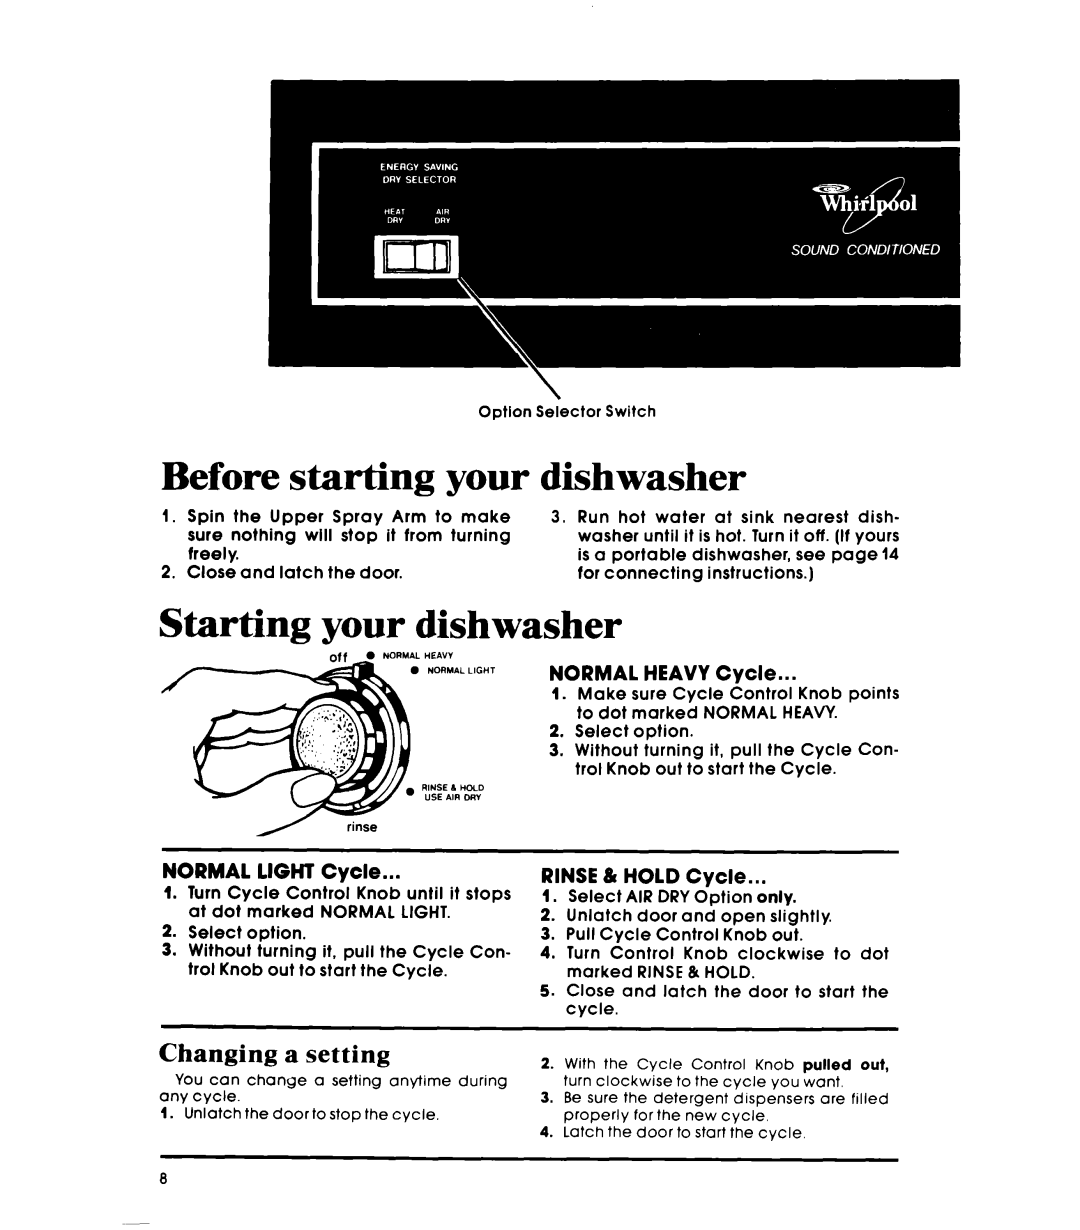 Whirlpool DP3801XL Before starting your, Starting your dishwasher NORMALHEA””, Changing a setting, NORMAL HEAVY Cycle 